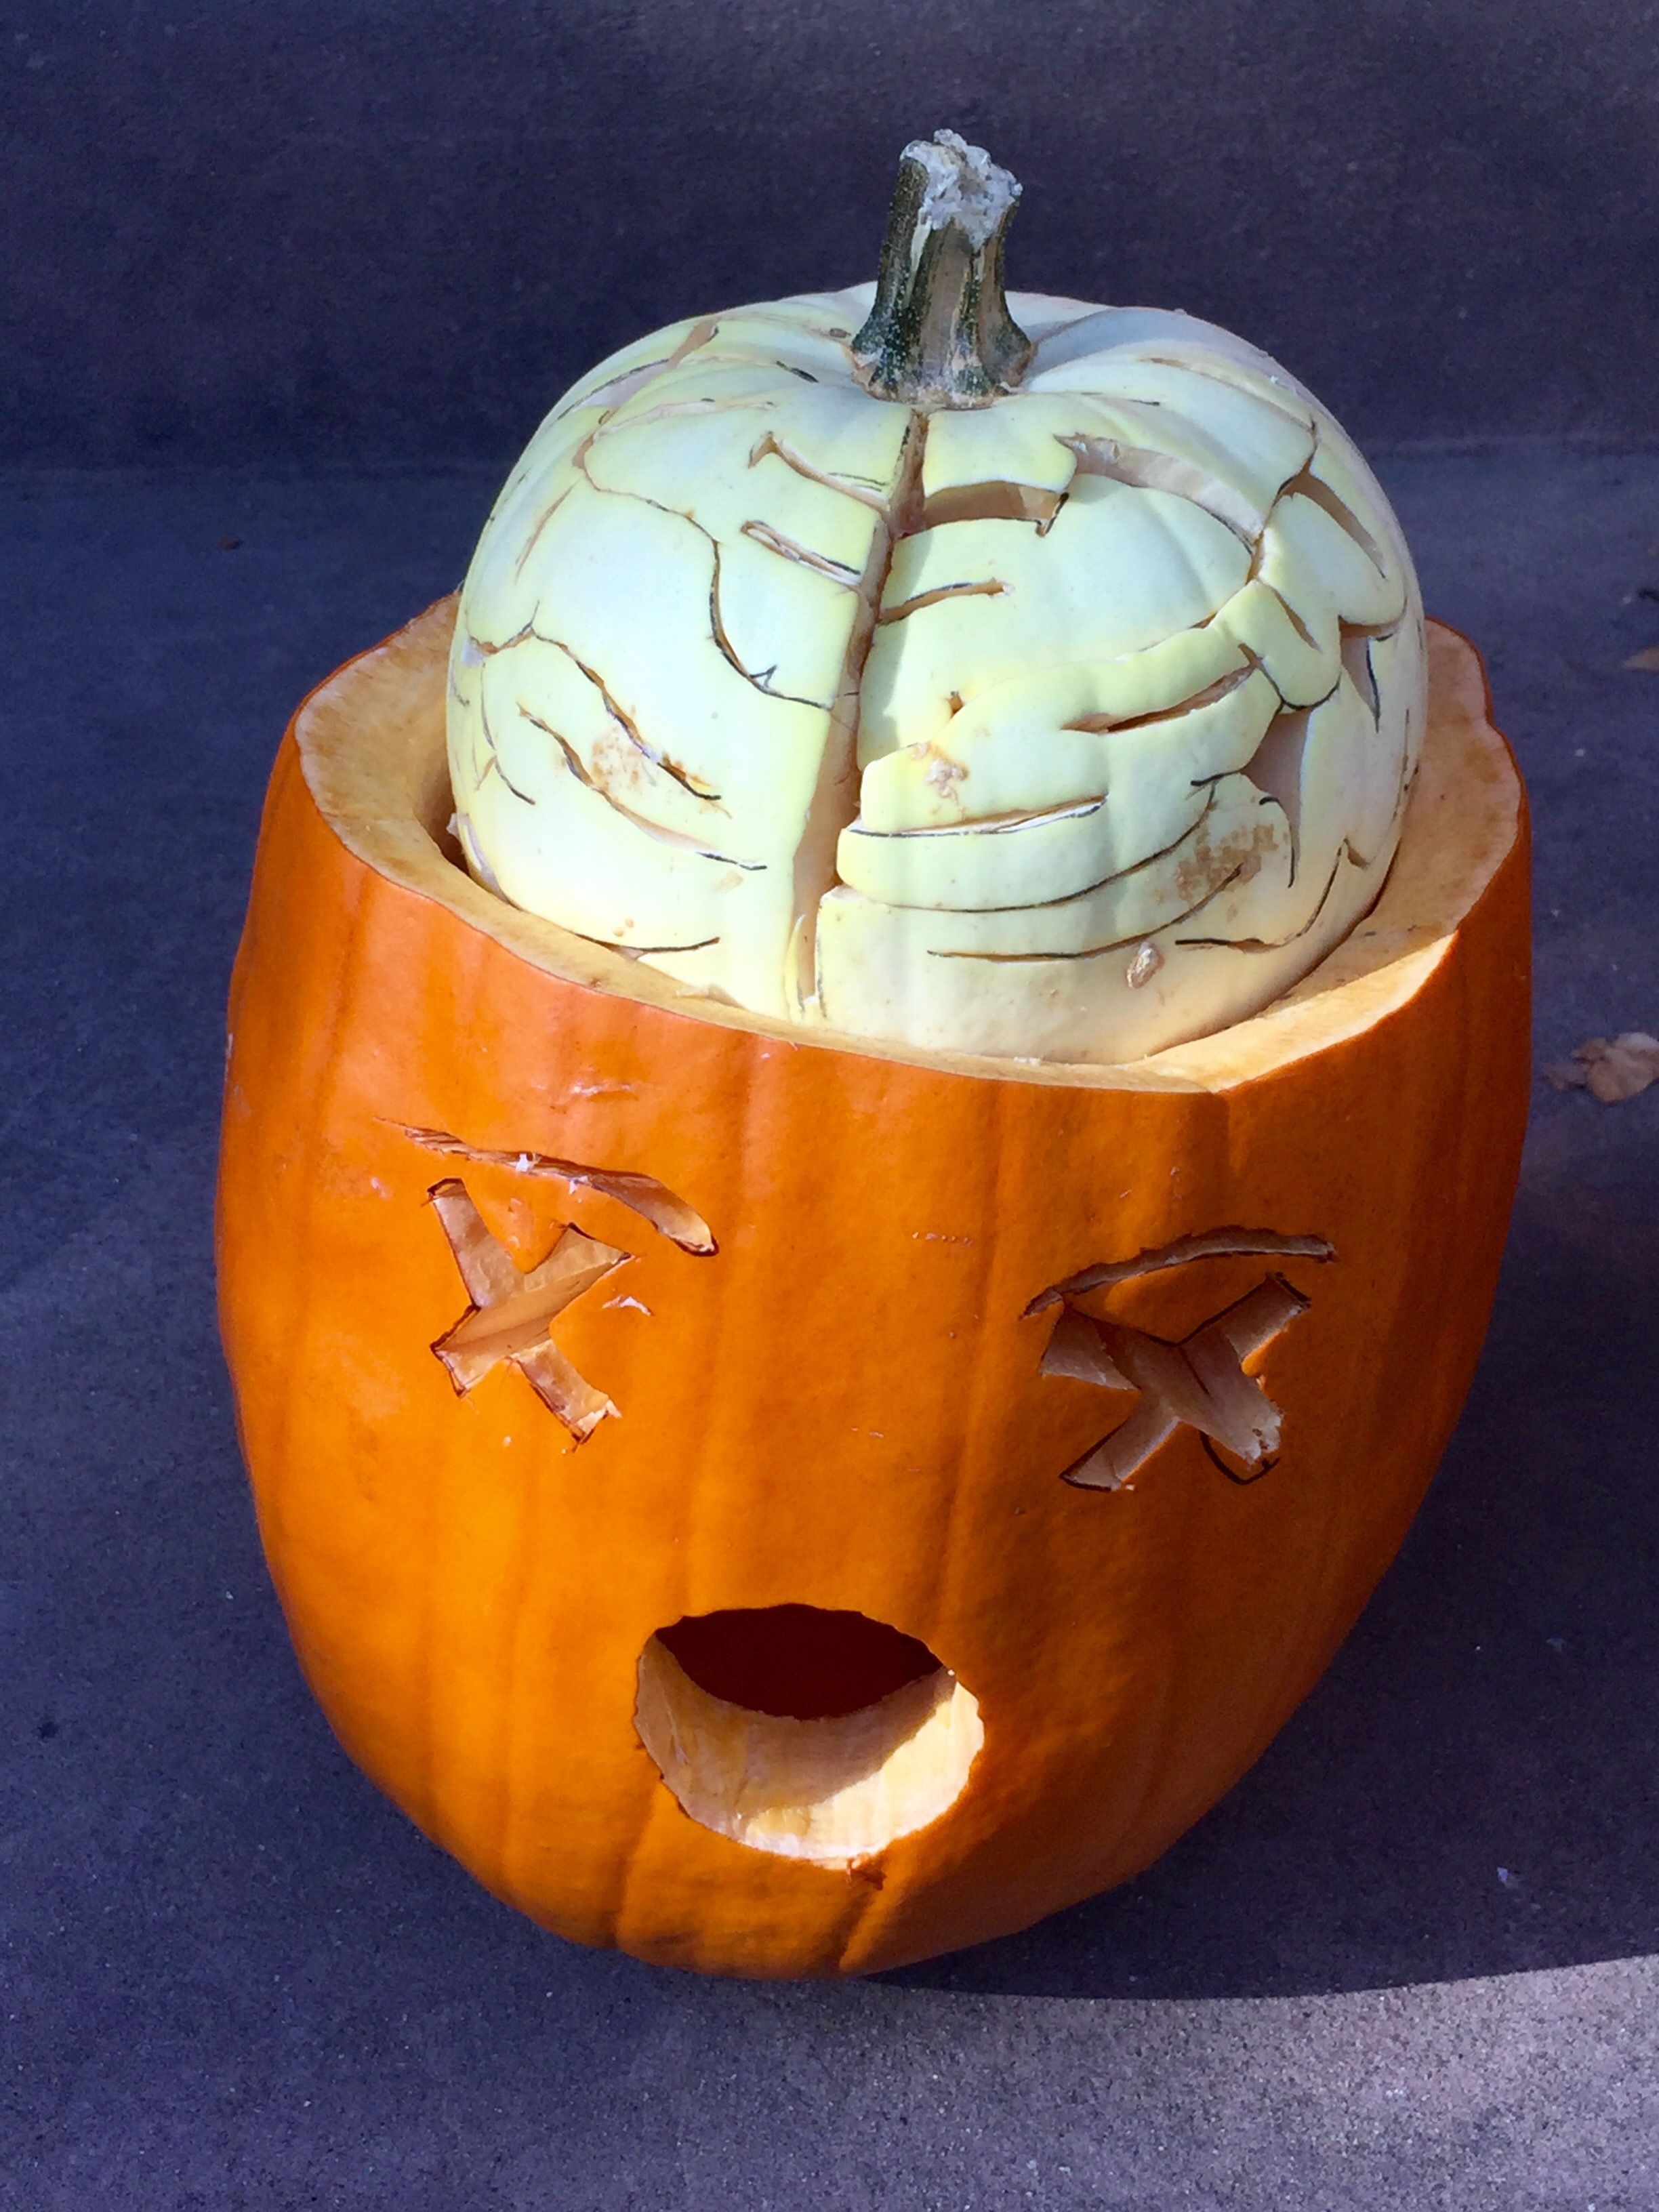 Halloween Pumpkin Face Carvings: Get Inspired with These Spooktacular Ideas